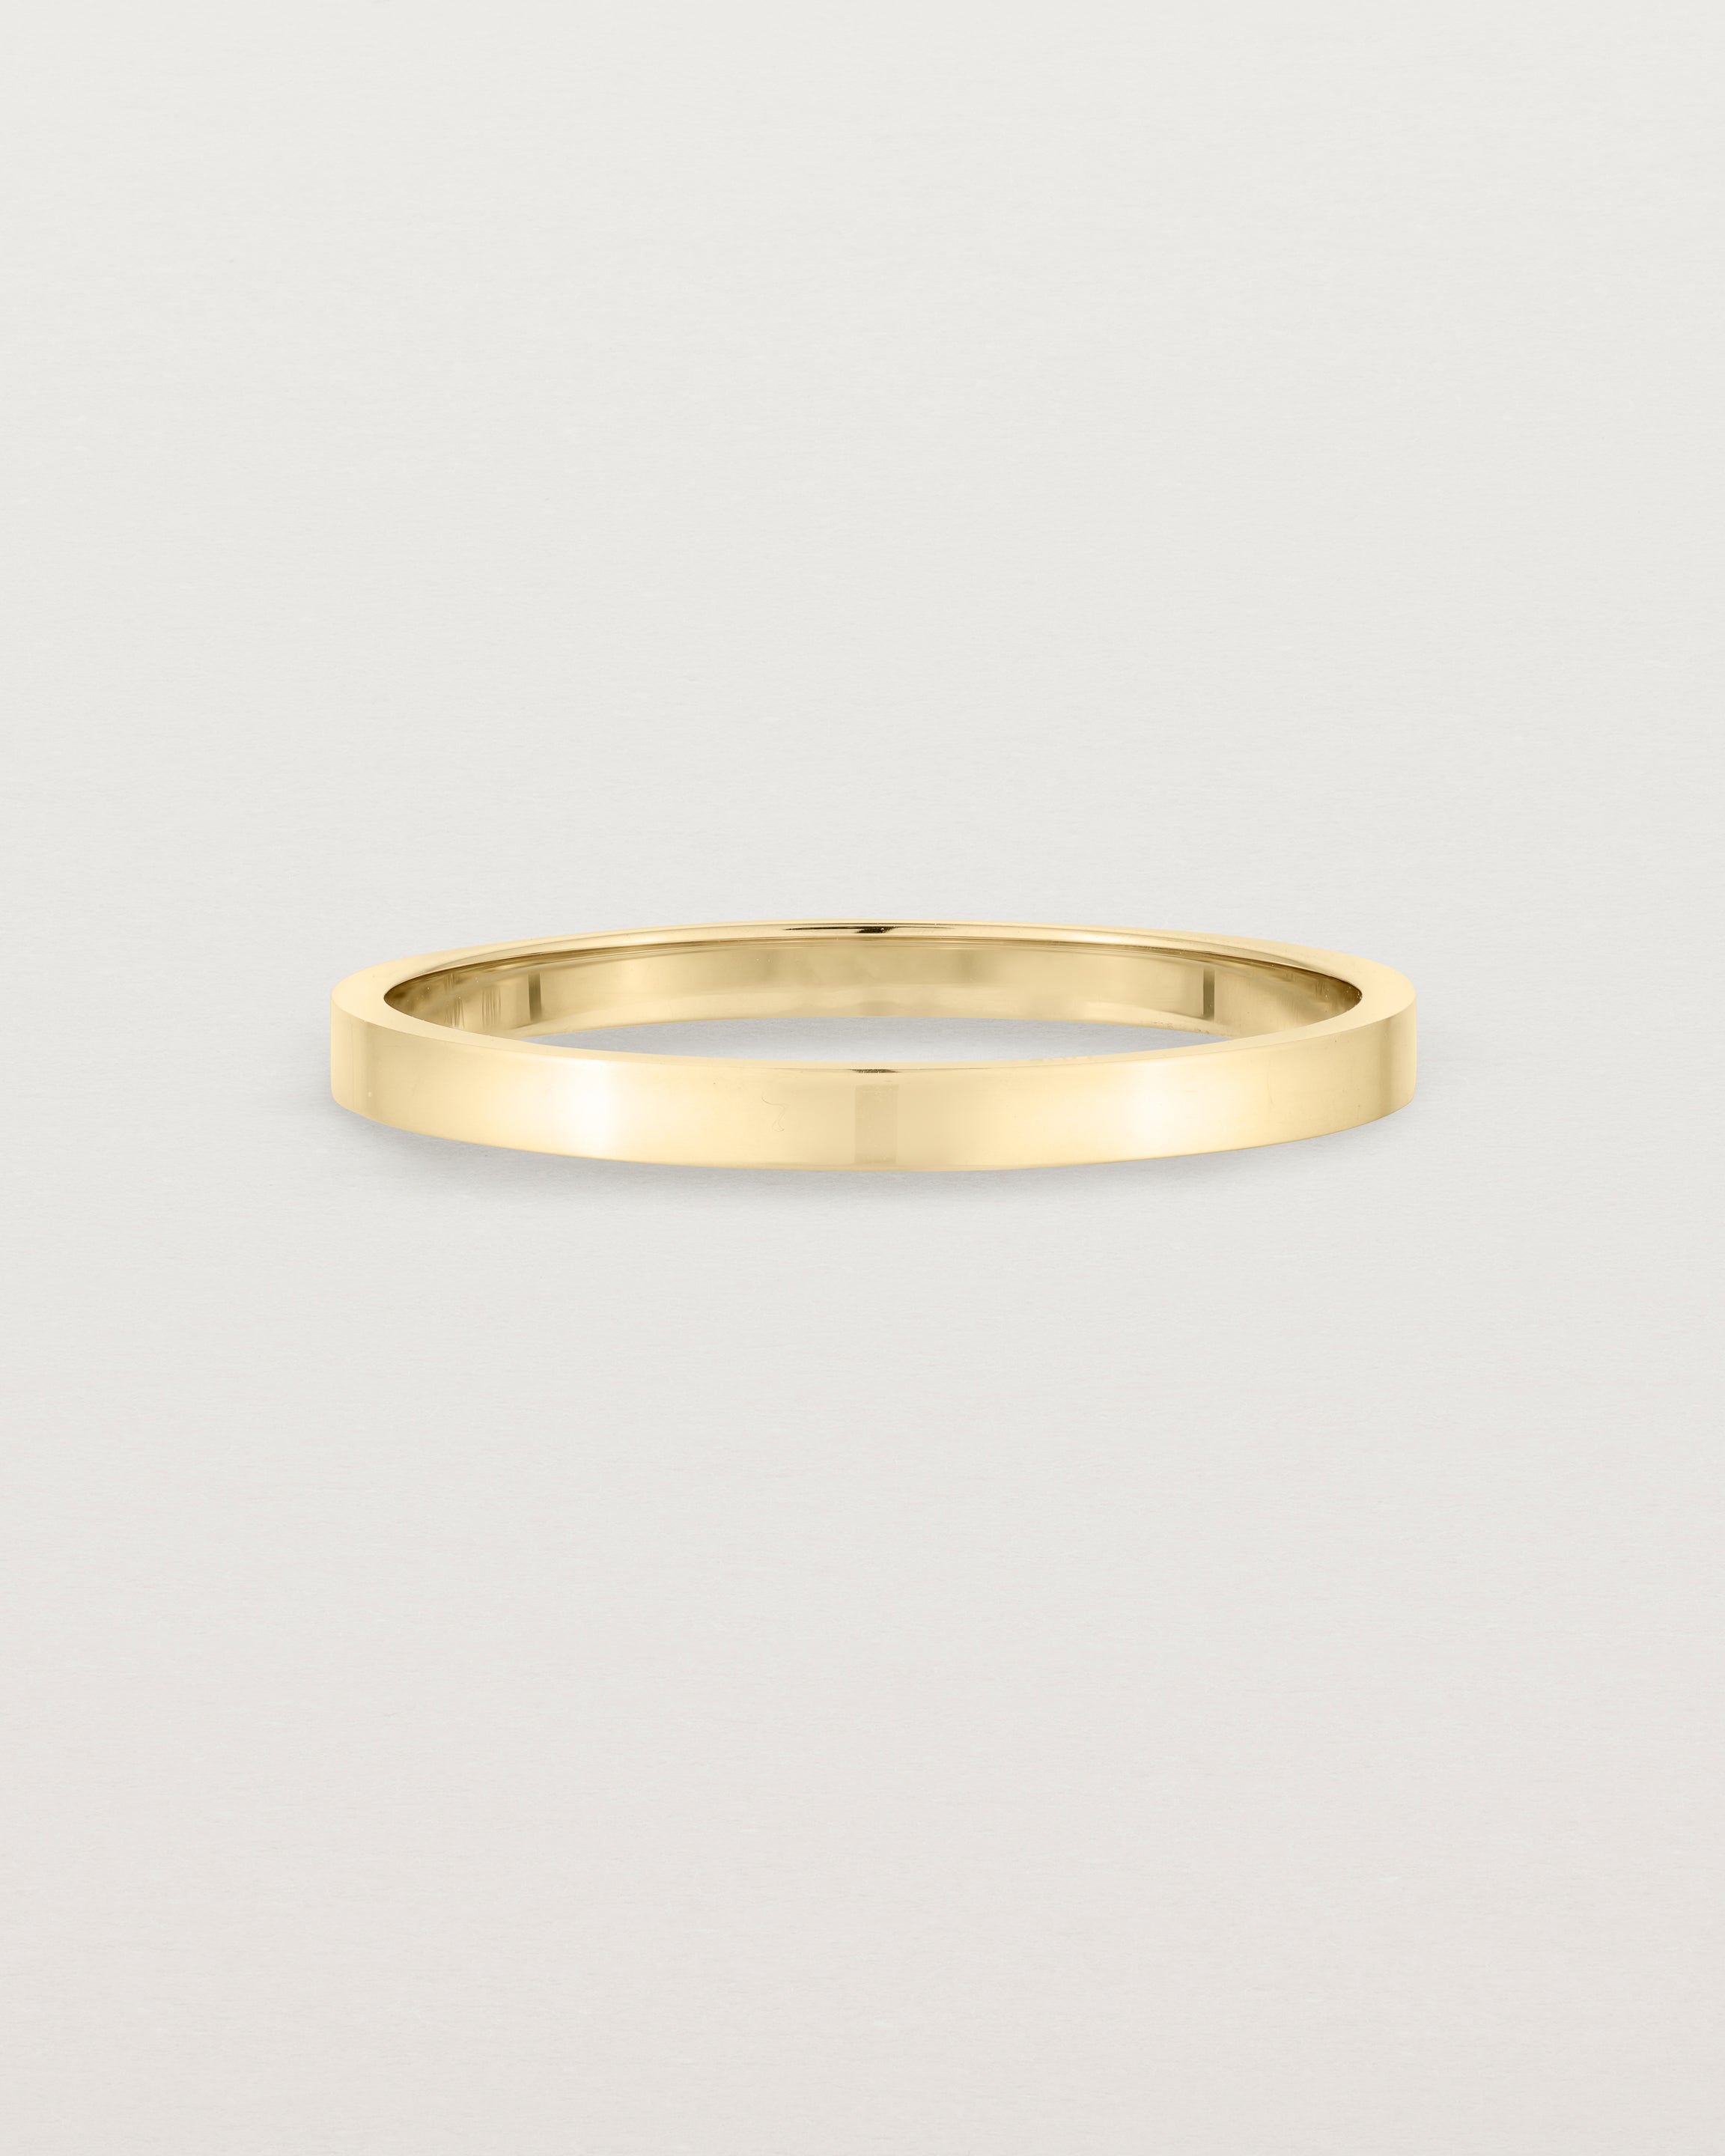 Our square profile, flat wedding band crafted in yellow gold